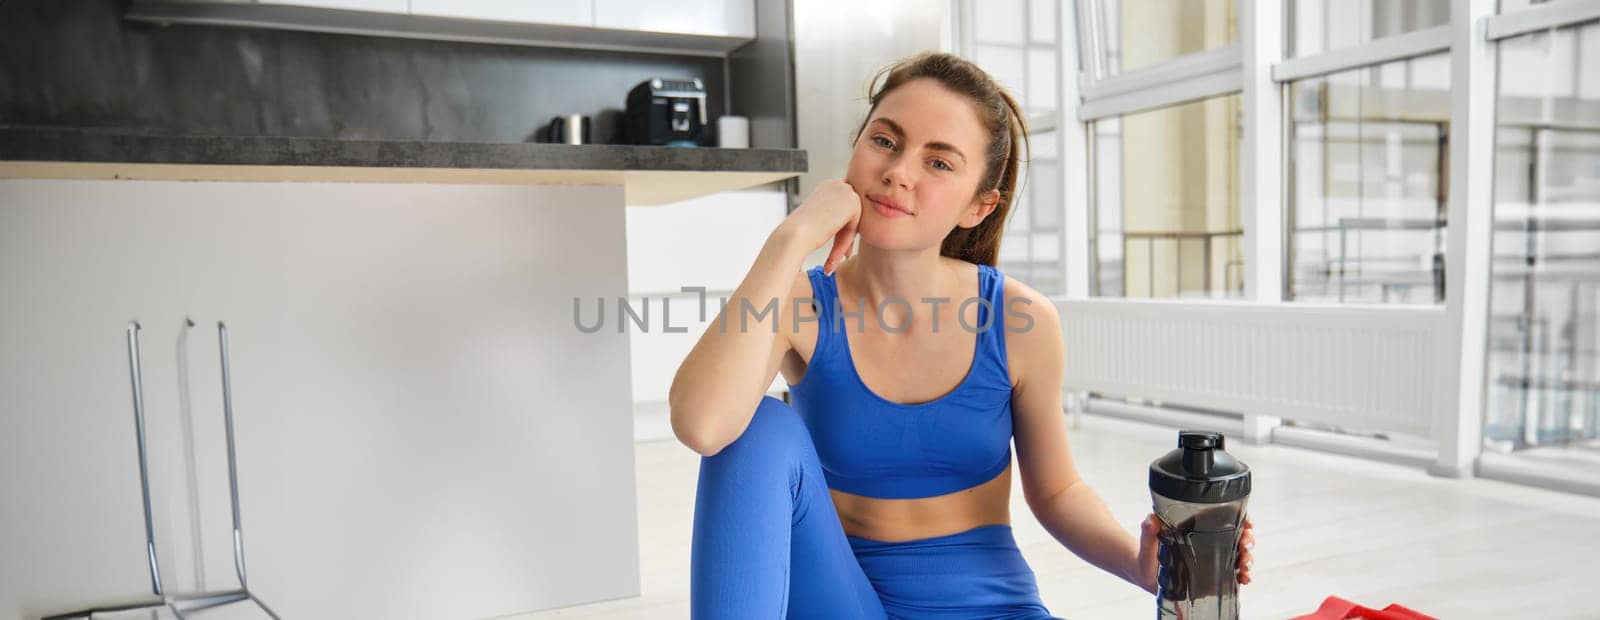 Smiling young woman doing sports in her house, looking at camera and smiling, drinking water after home fitness session.